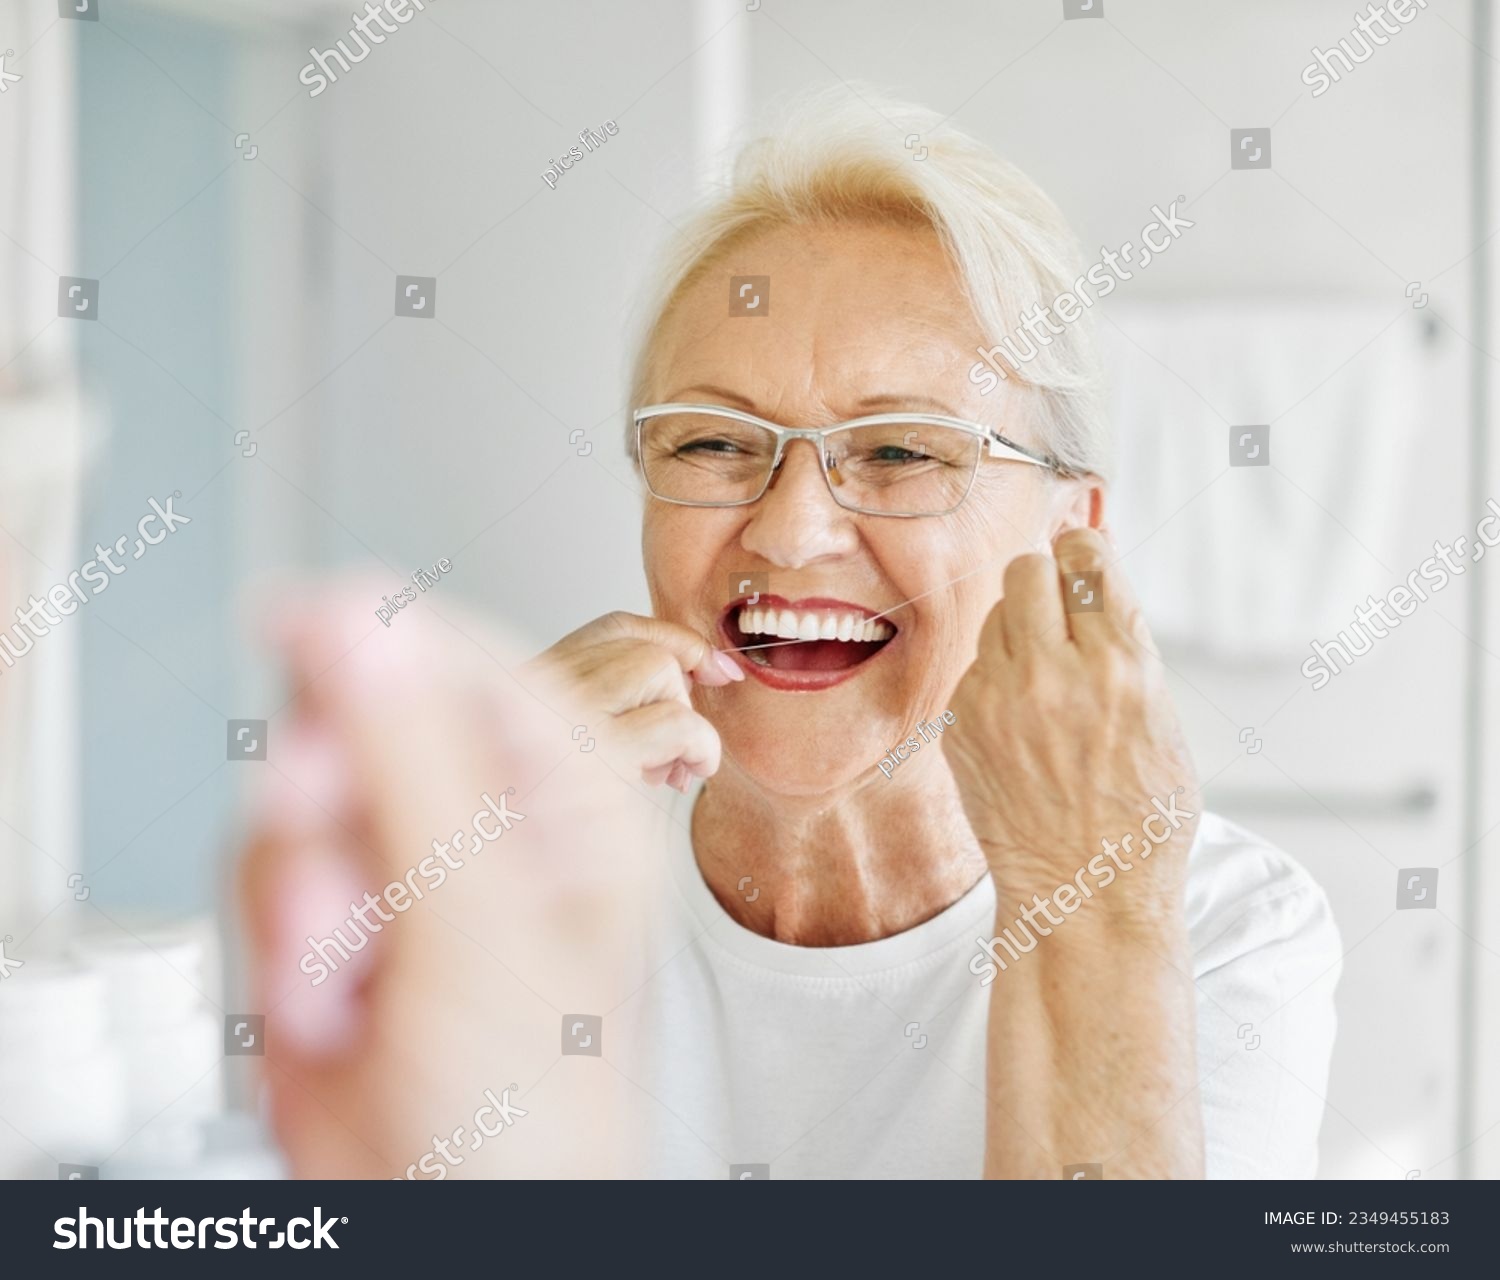 Portrait of an elderly senior woman is cleaning brushing his teeth using dental floss in front of mirror in bathroom. Dental hygiene, vitality and beauty concepts #2349455183